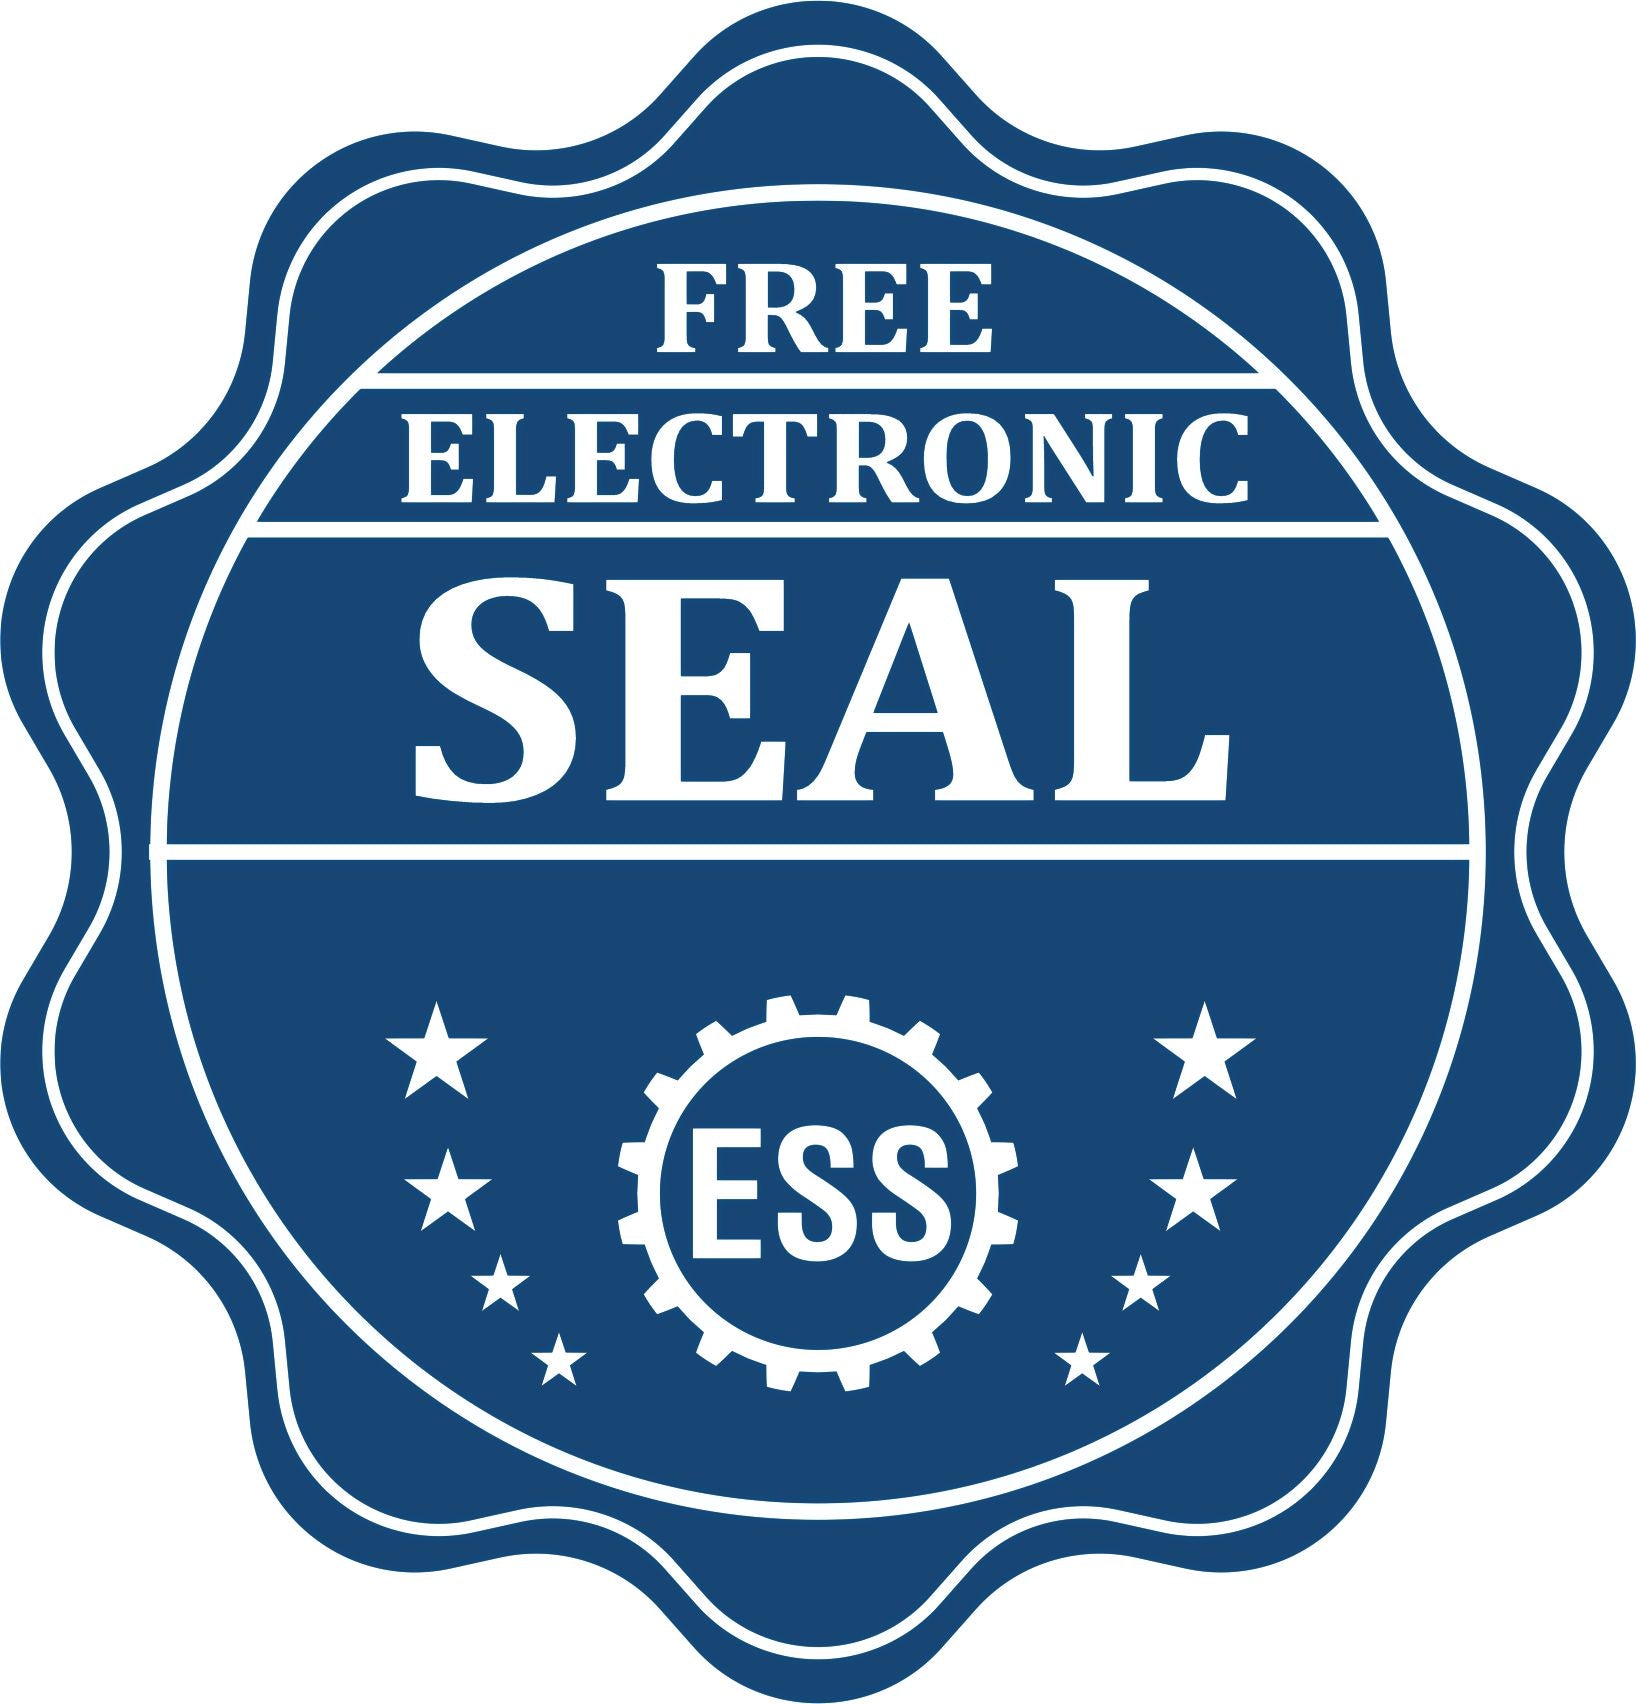 A badge showing a free electronic seal for the New York Professional Geologist Seal Stamp with stars and the ESS gear on the emblem.